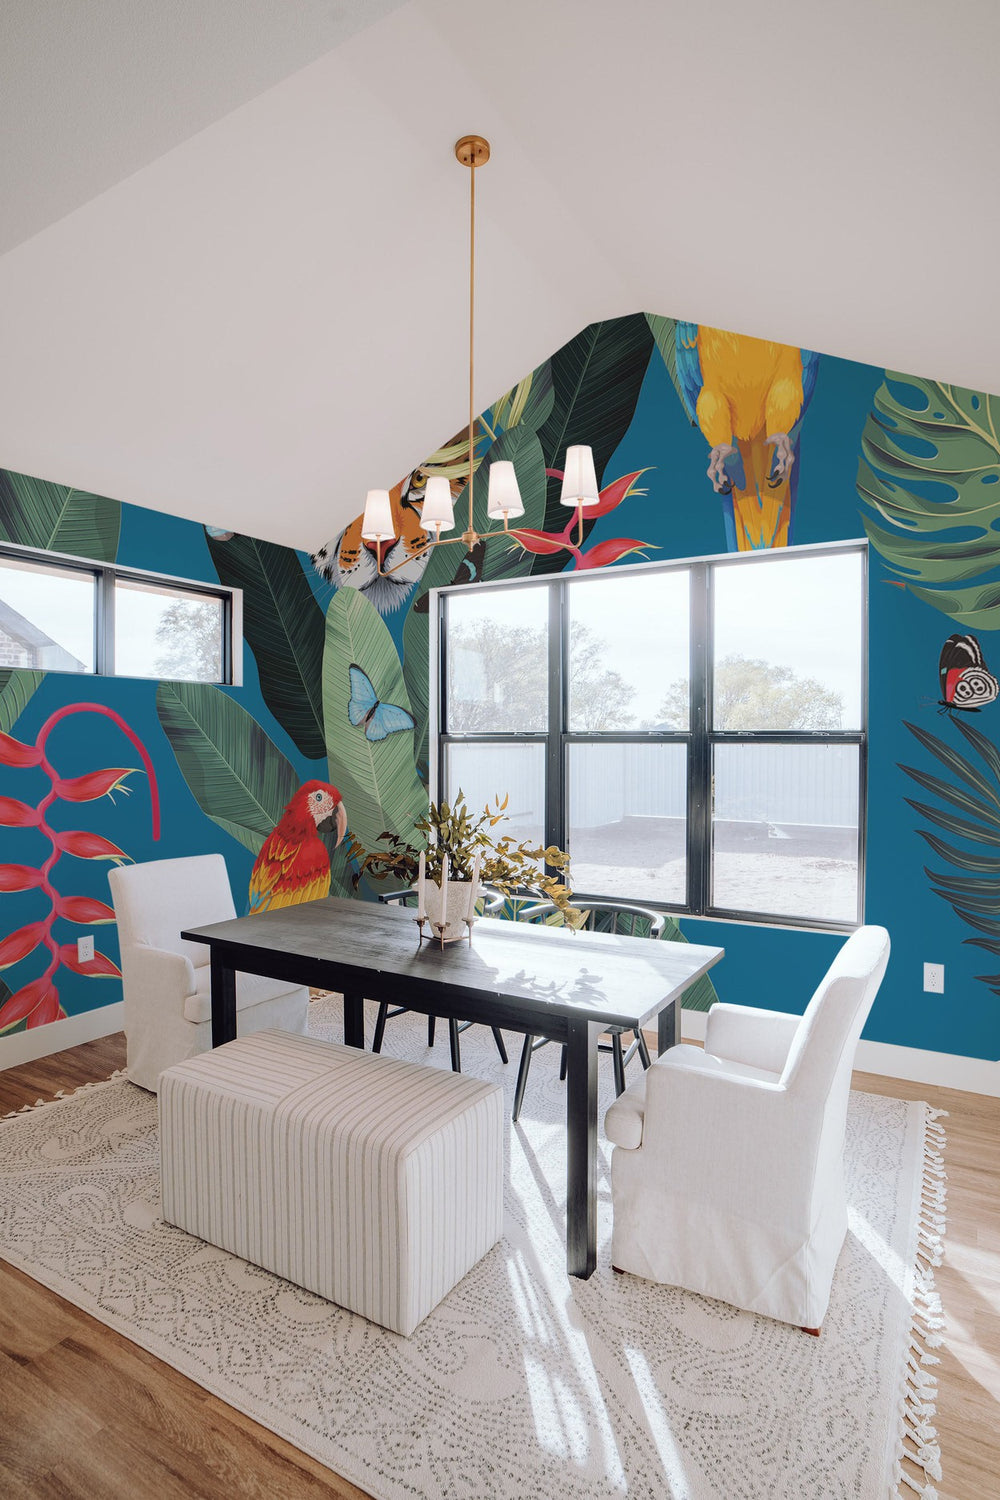 A bright interior with a tropical-themed wall mural featuring large leaves and a parrot, complemented by modern furniture and large windows.